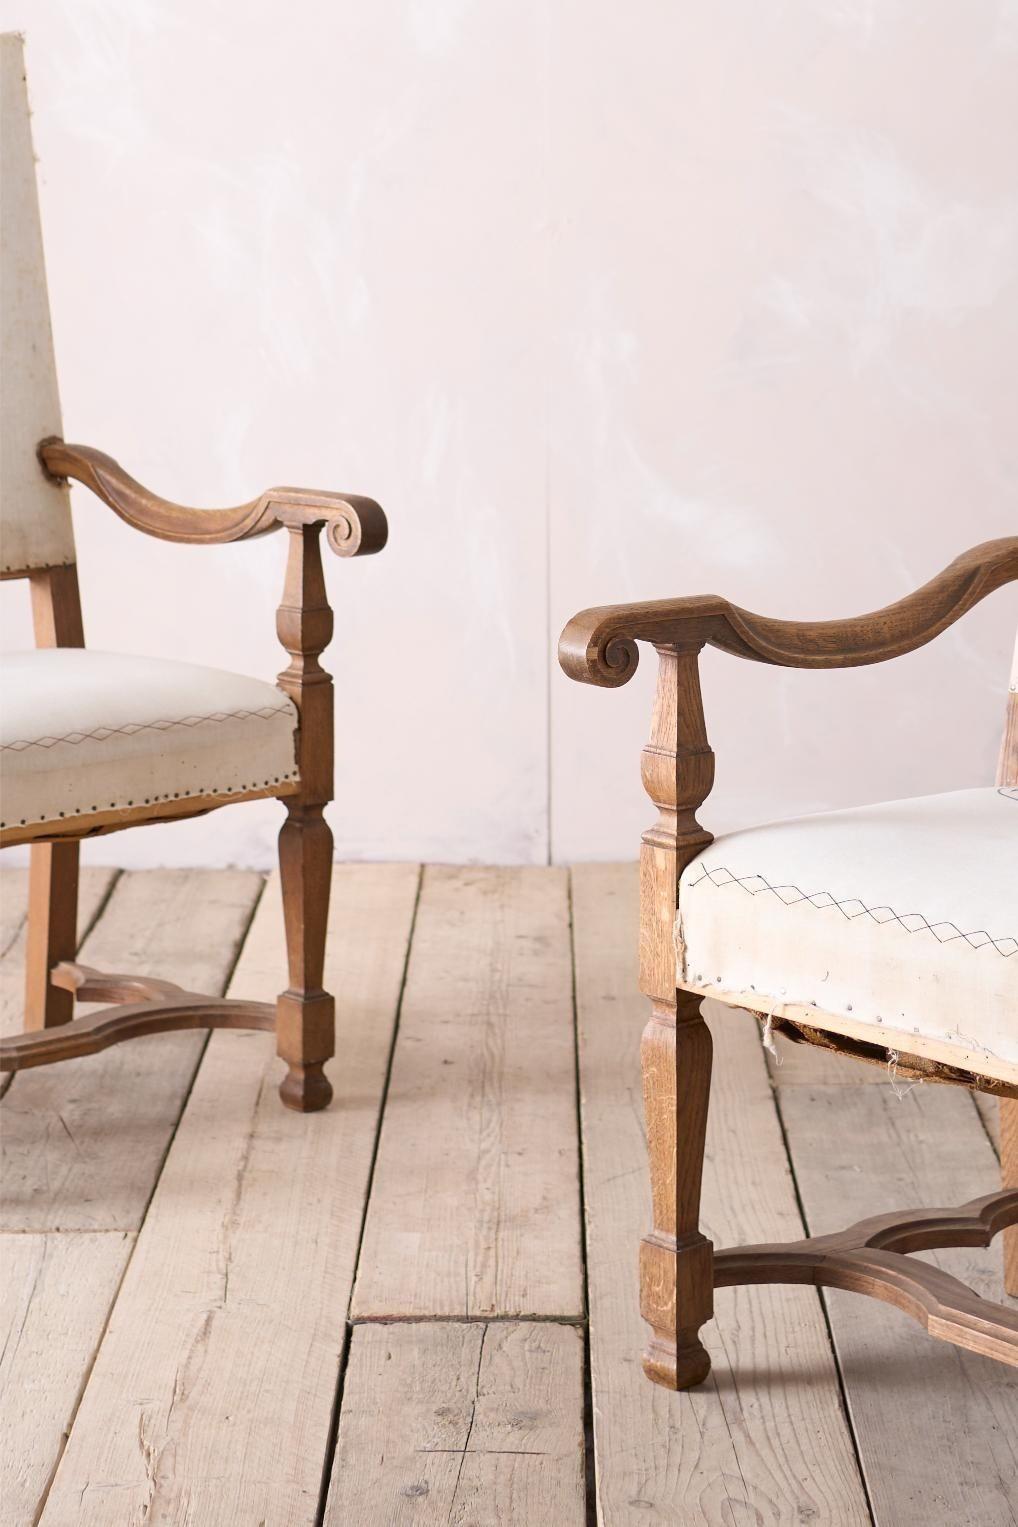 These are a very stylish, late 19th century pair of French open armchairs. Made from oak with a great shaped stretcher. The quality is very high and the design is classic that I believe will work well in a great number of interiors. The shaped arm